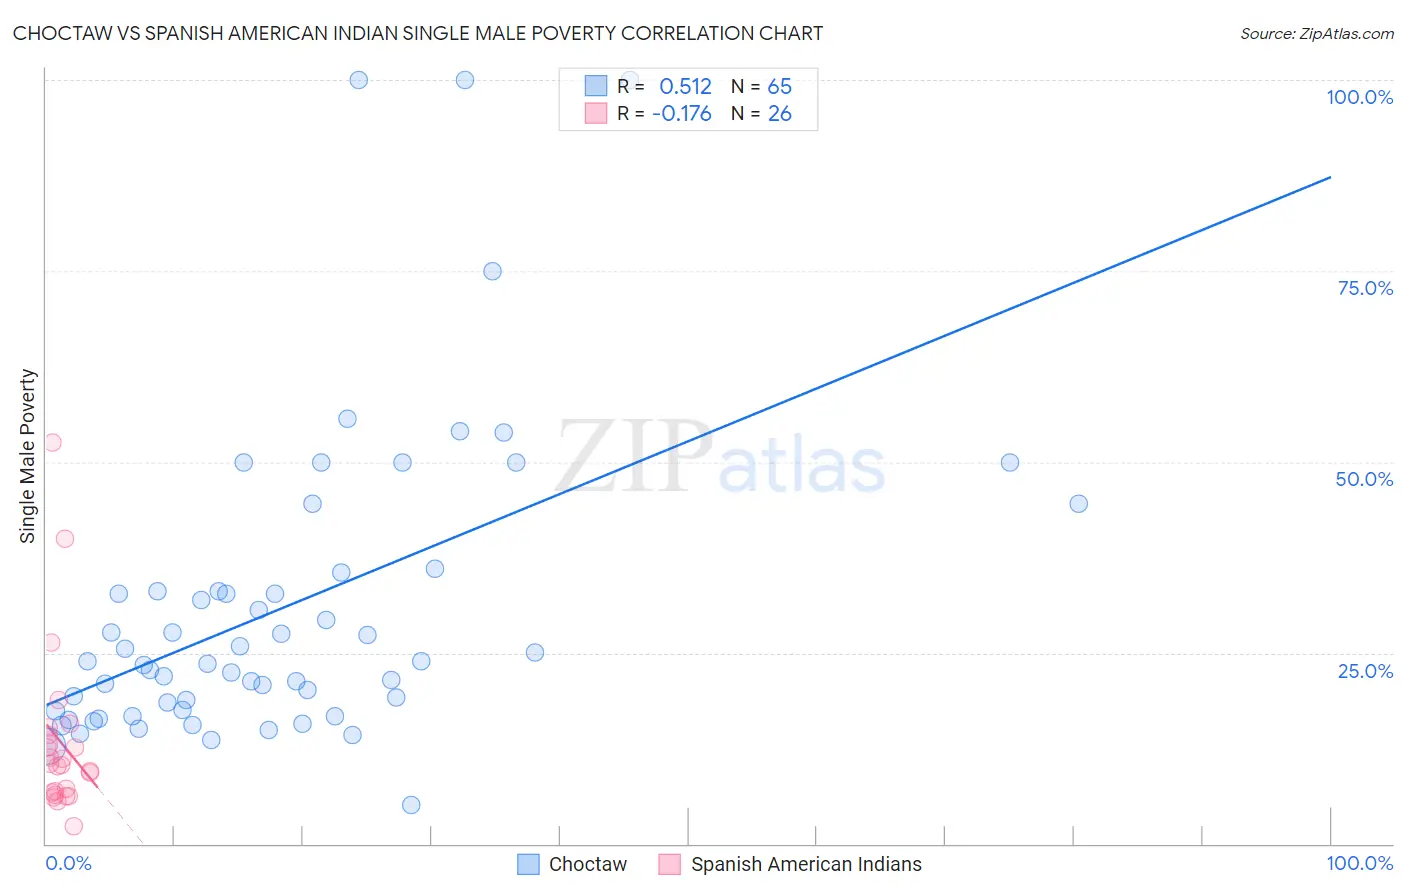 Choctaw vs Spanish American Indian Single Male Poverty